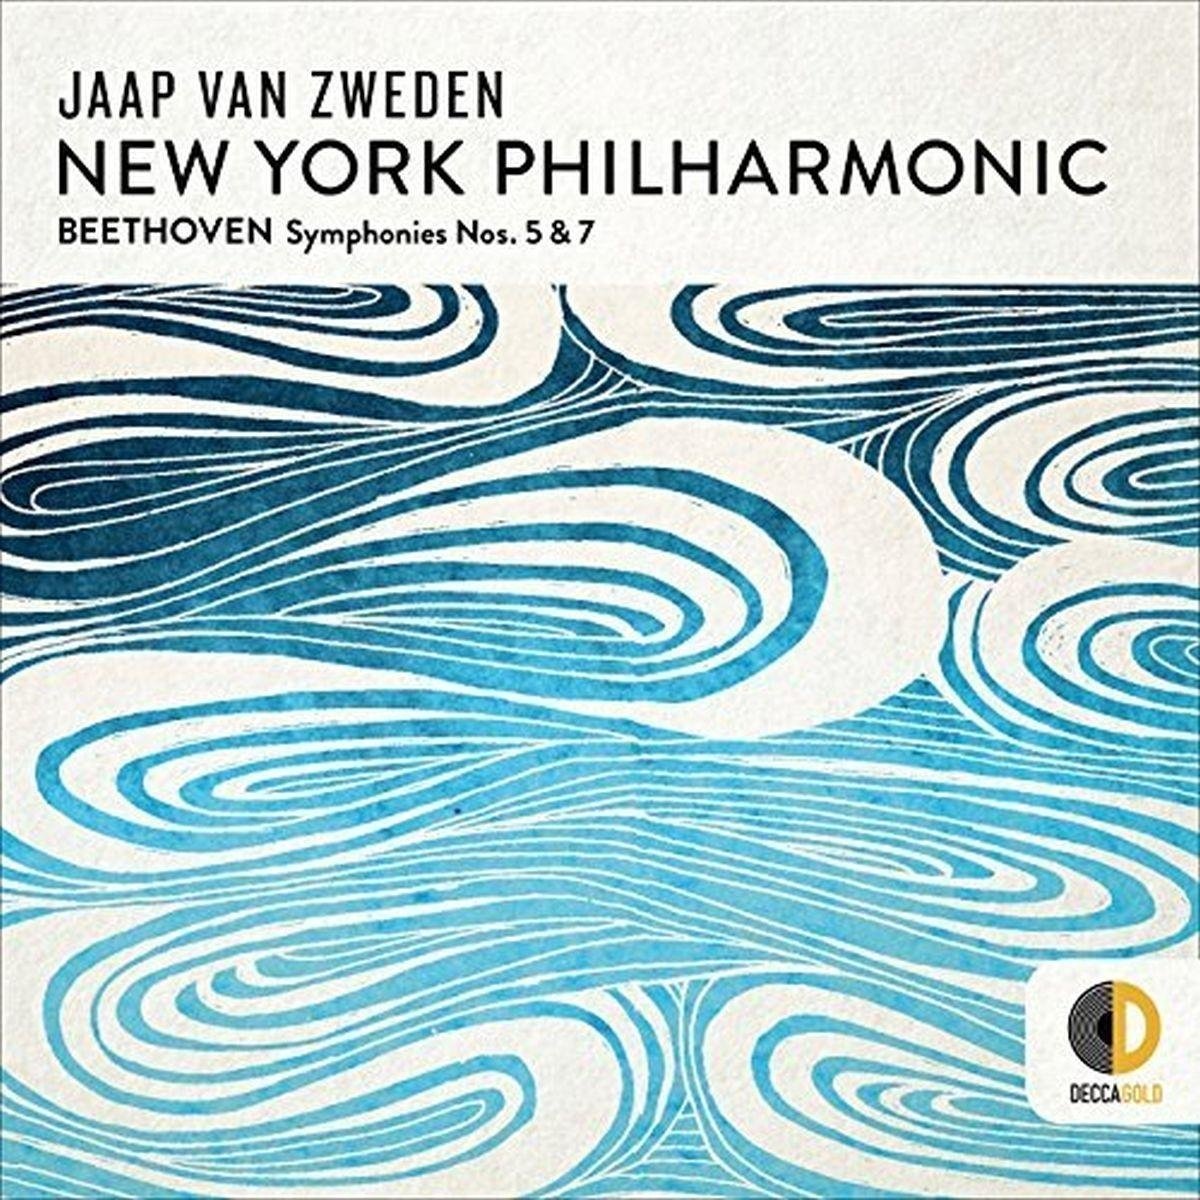 Beethoven Symphonies Nos. 5 & 7  conducted by Jaap